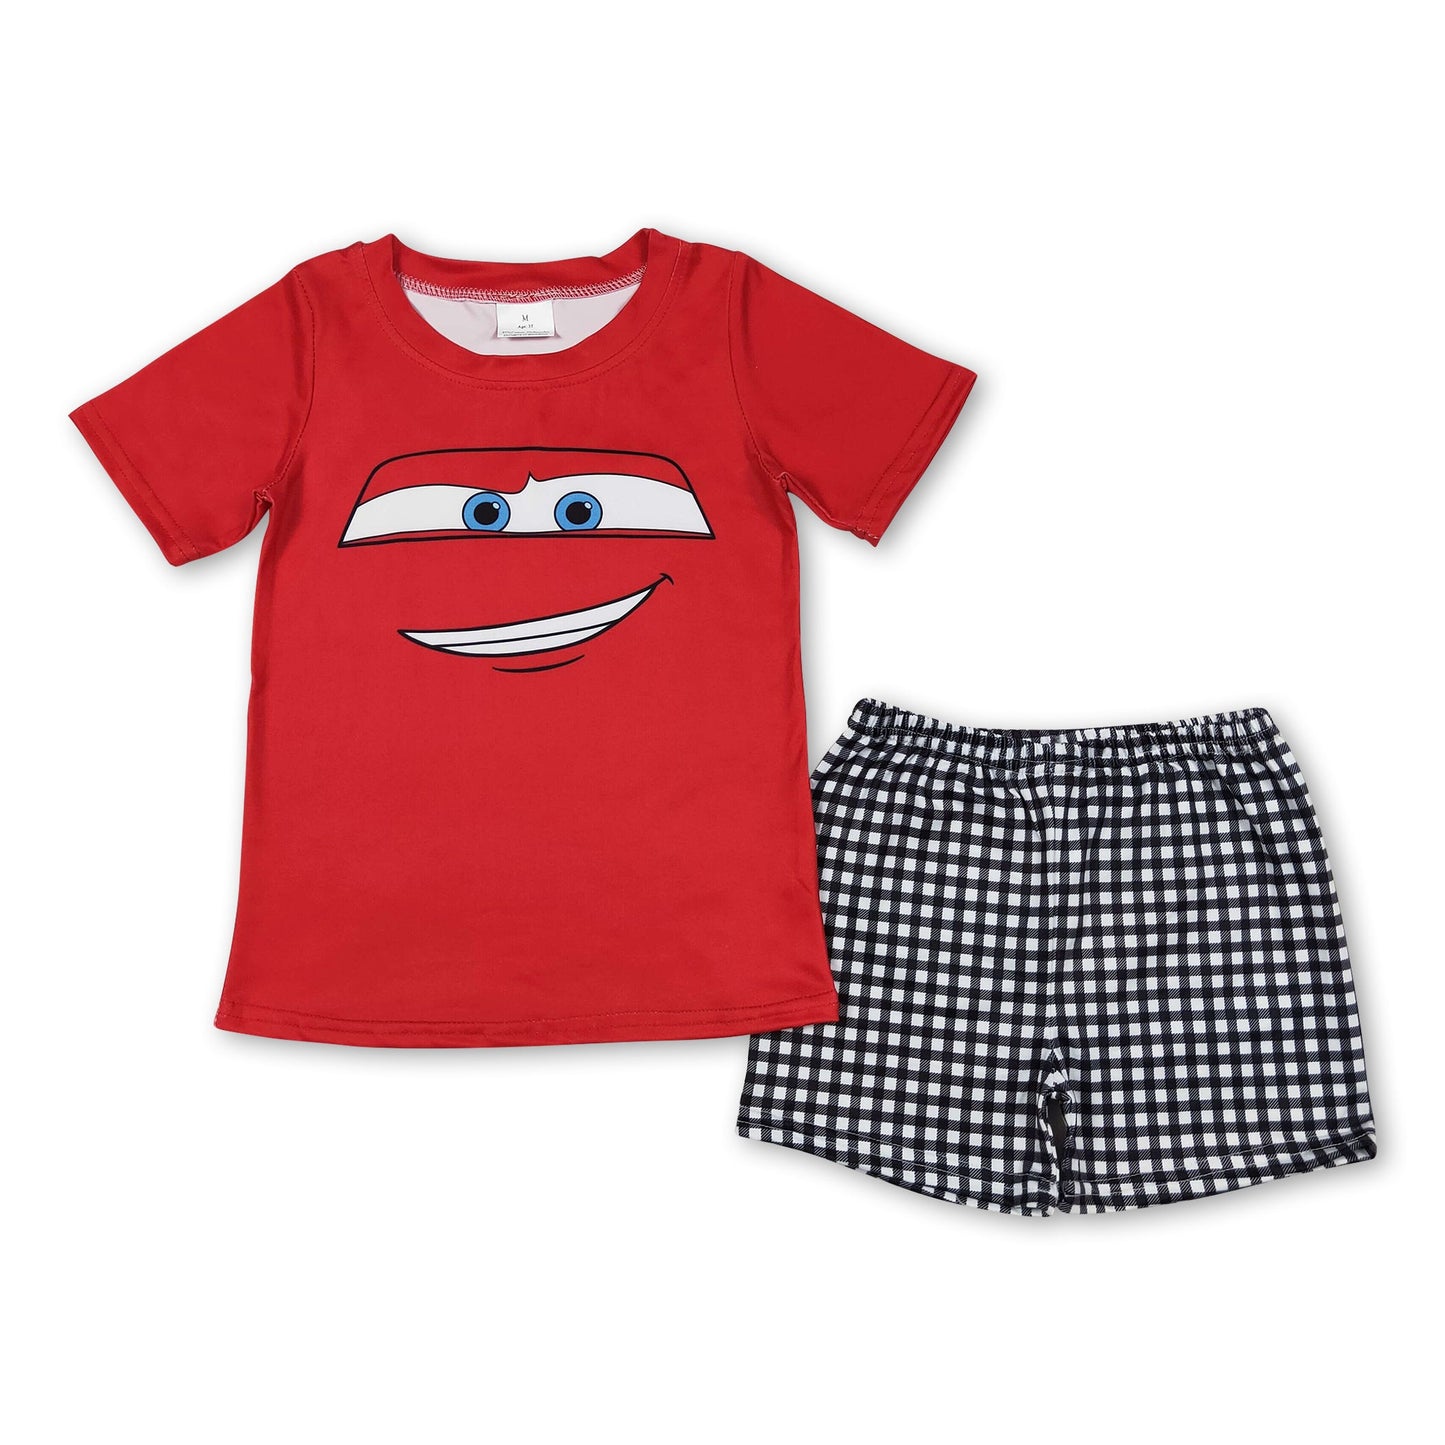 Red short sleeves top plaid pocket shorts boys outfits